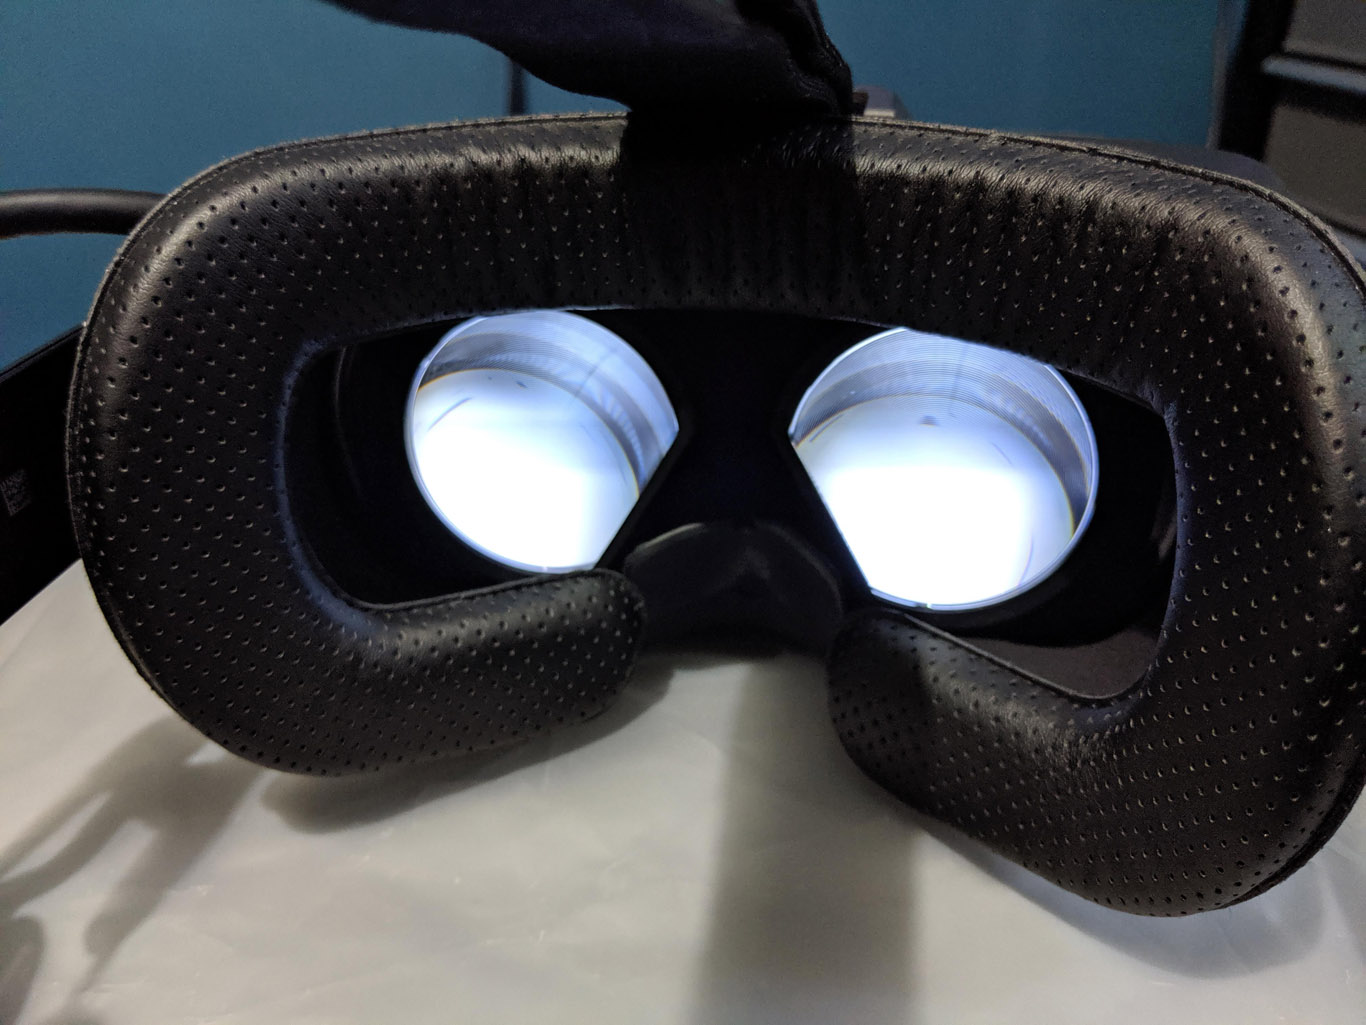 Valve Index turns one: all the tweaks and tricks from one year of